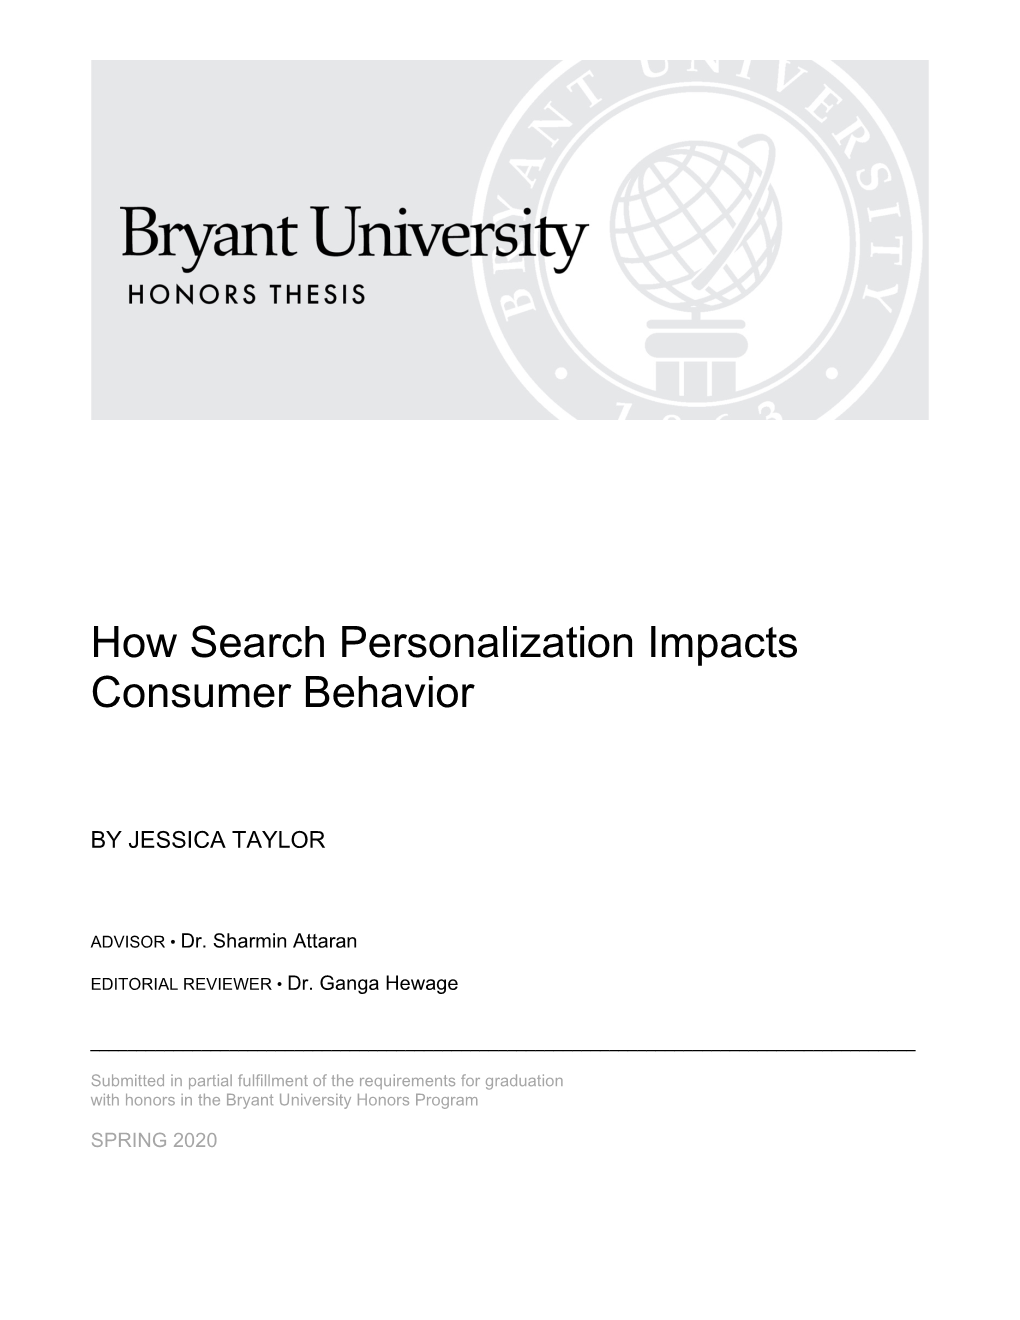 How Search Personalization Impacts Consumer Behavior